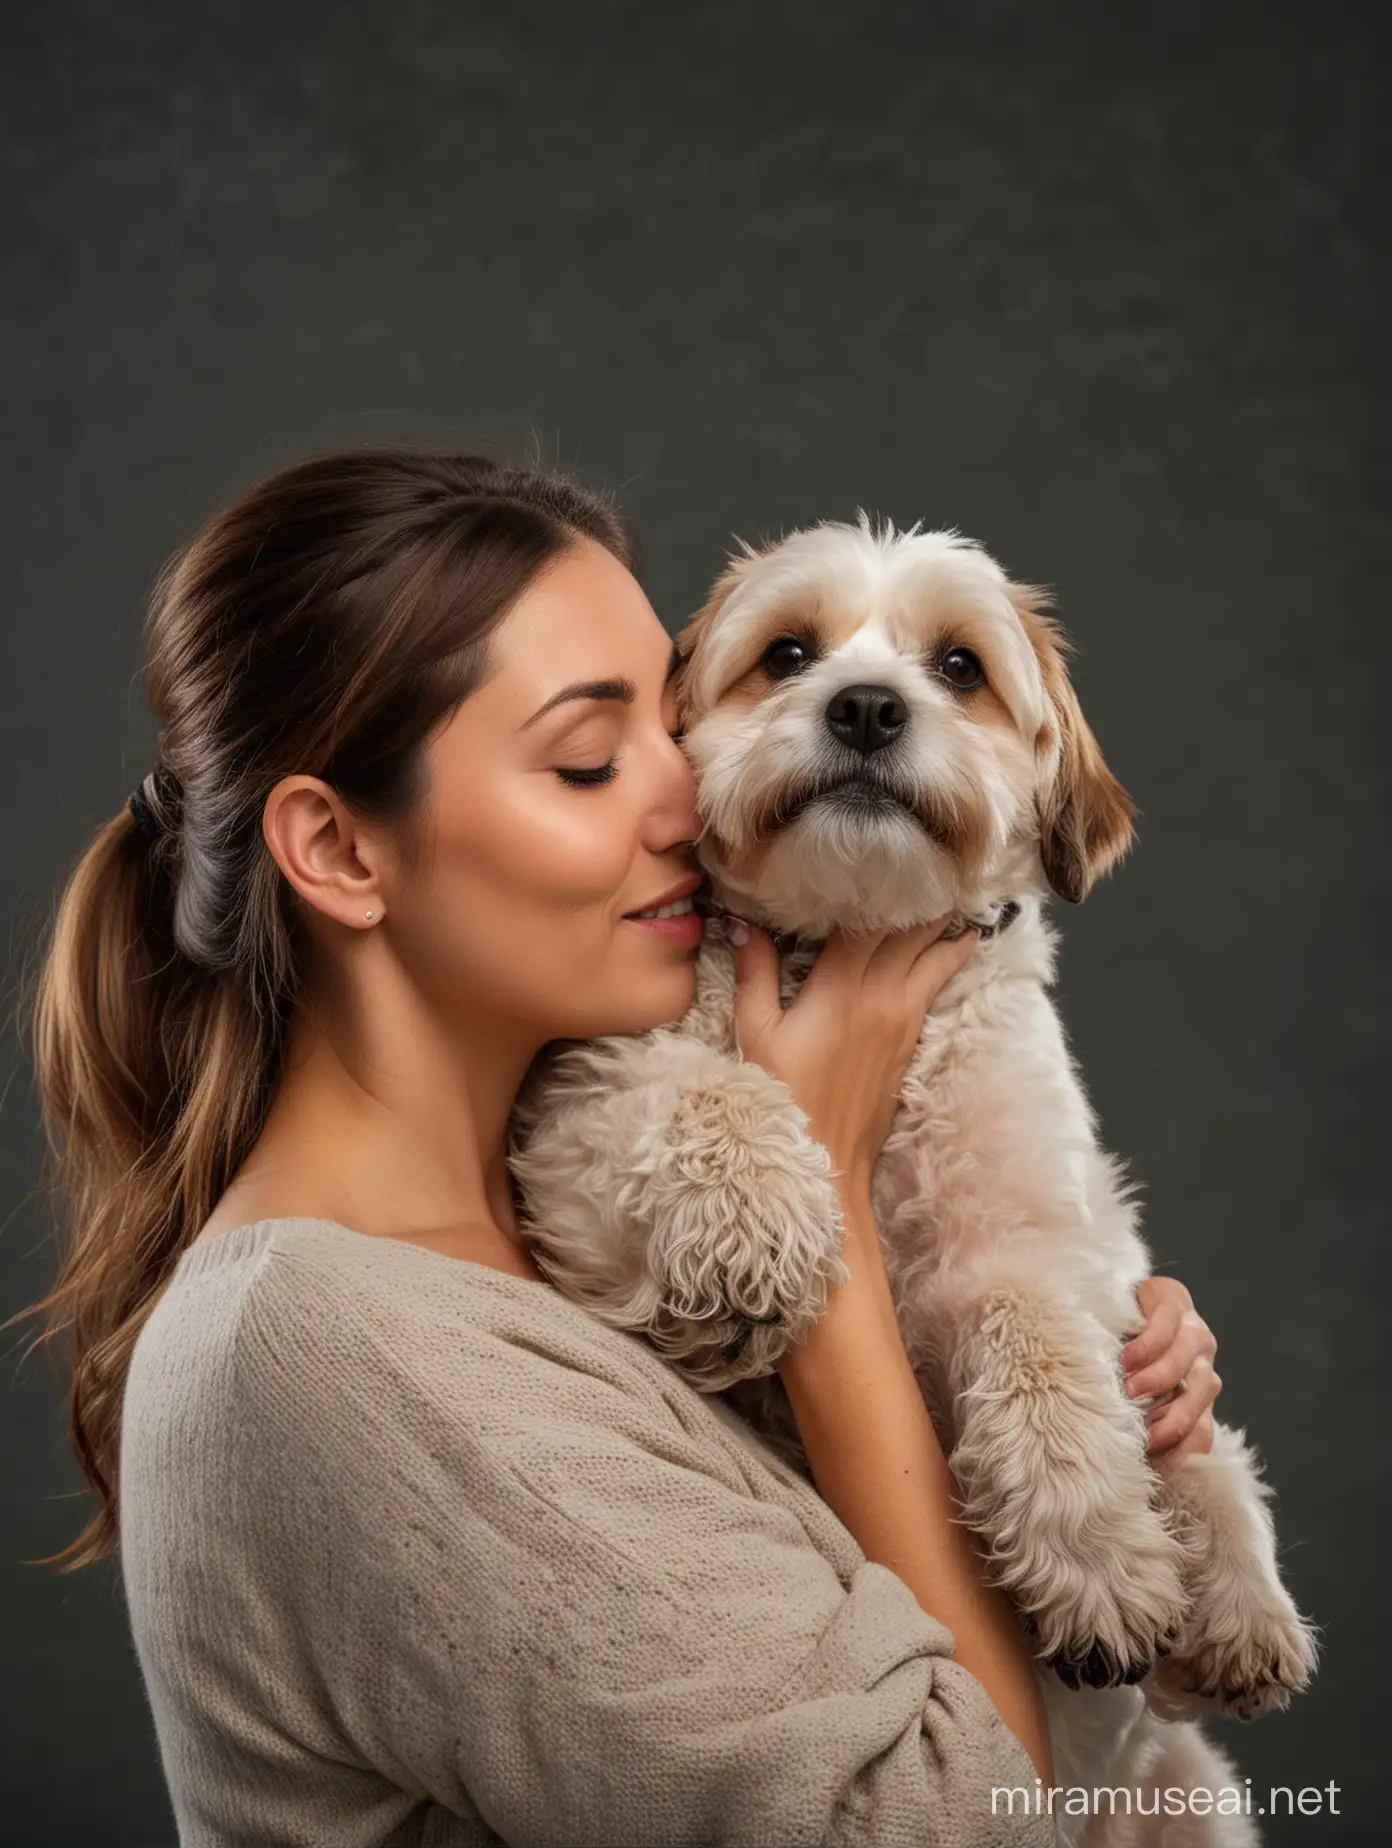 Woman cuddling her dog, her dog is high up in her arms. She has her back to the camera, she's kissing her dog, and her dog is looking straight into the camera. Photo taken in the studio on a dark background. 